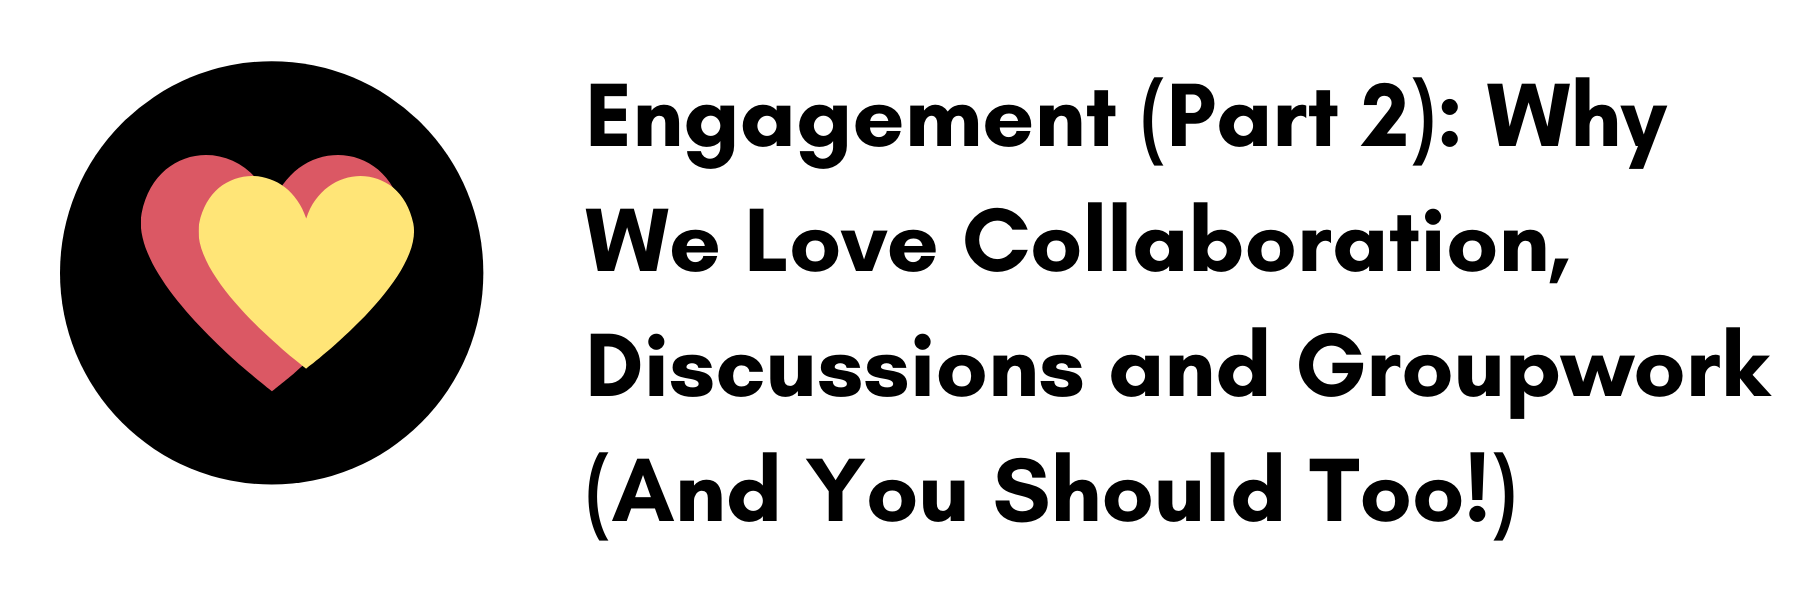 Engagement (part 2): Why we love collaboration, discussions and groupwork (and you should too!)